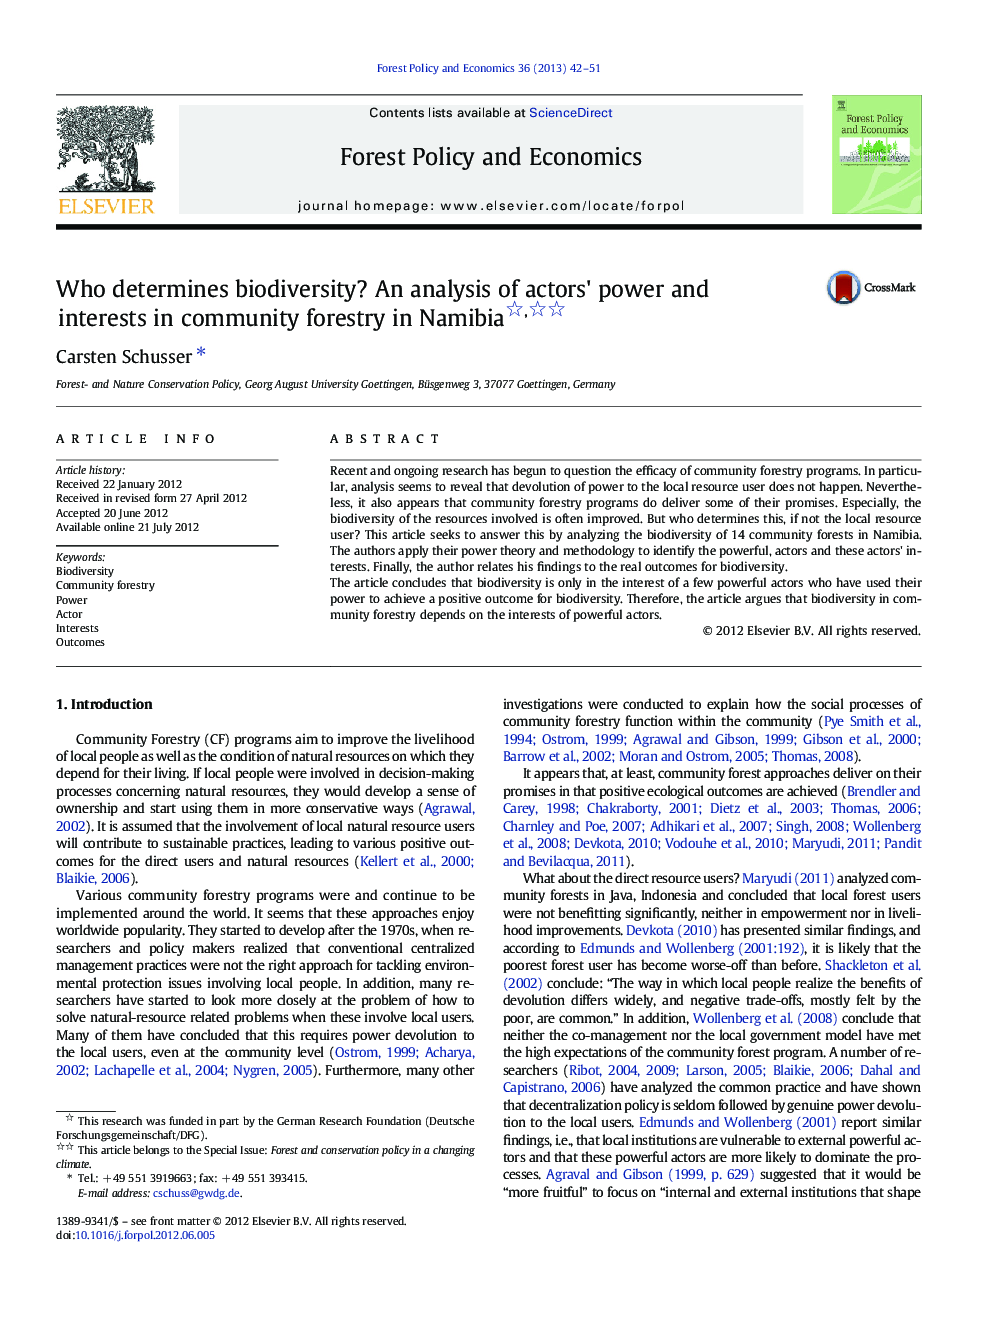 Who determines biodiversity? An analysis of actors' power and interests in community forestry in Namibia 